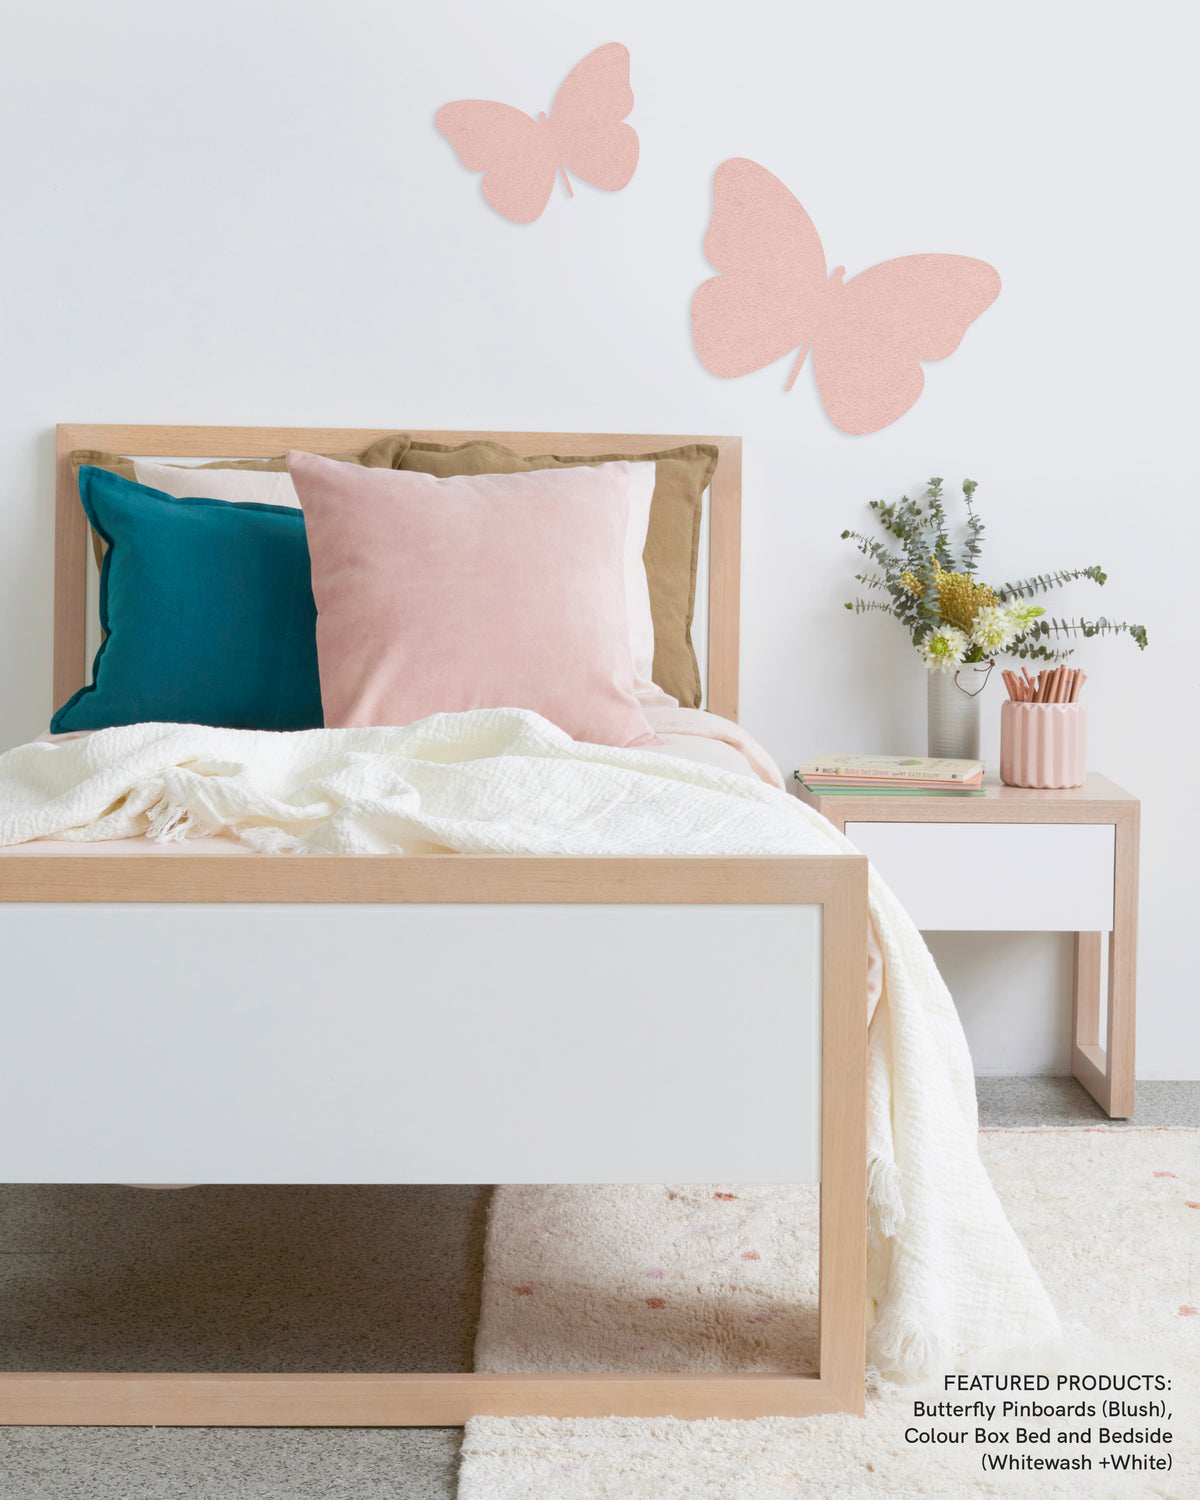 Our gorgeous Butterfly Pinboards have a beautiful felt-like appearance, and are amazing to touch as well as visually appealing in all living spaces. They come with easy peel and stick tabs for your wall, making them ready for pinning straight away. Whether it’s over a desk or simply running down a wall, these pinboards are so versatile for little kids, big kids, and adults alike!